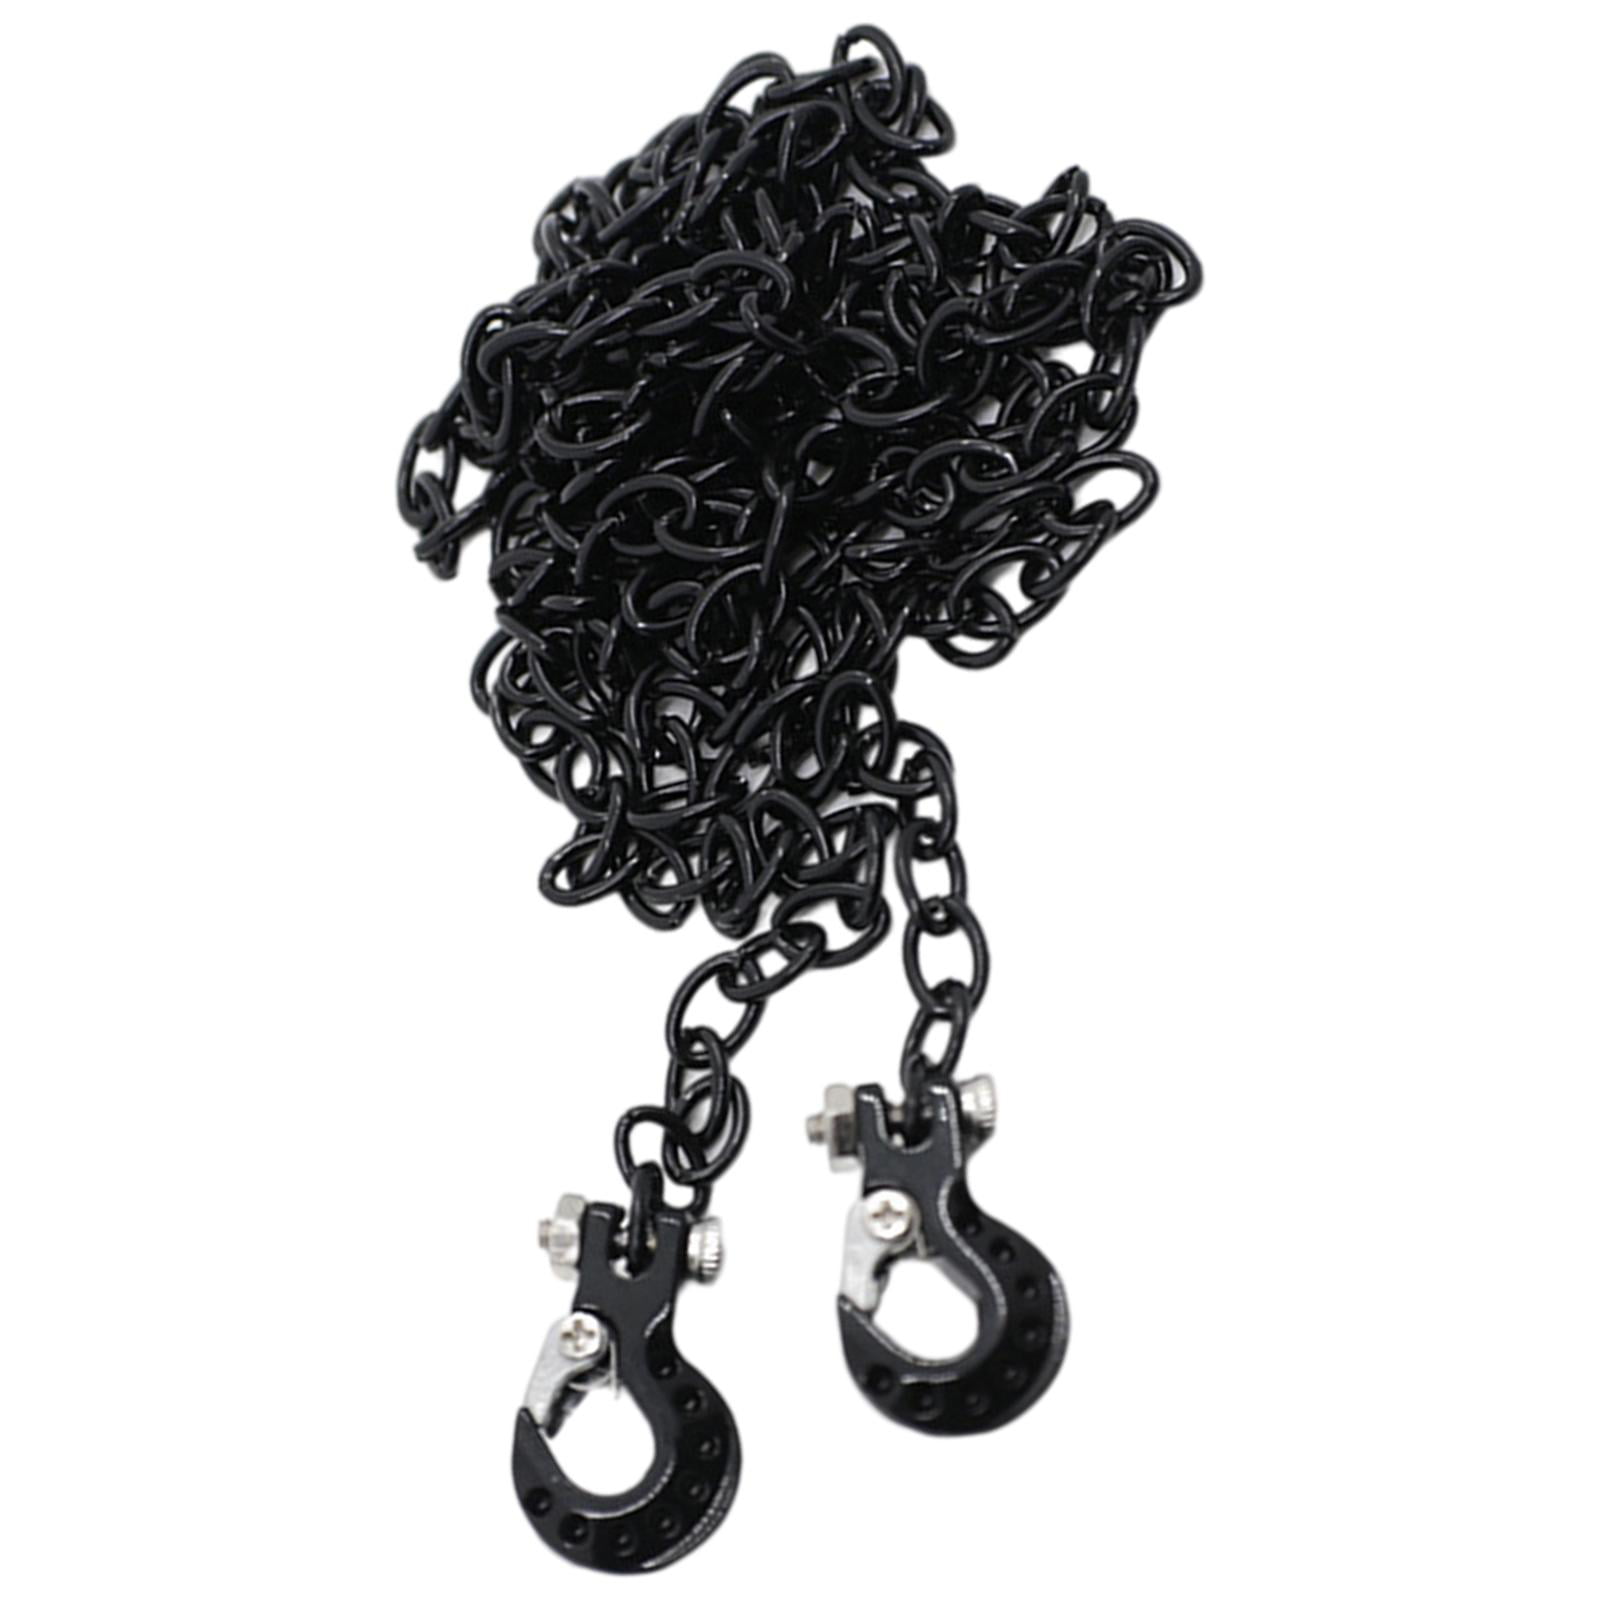 1/10 Scale Accessories METAL CHAIN WITH Hooks BLACK Chain 36" Long BLUE